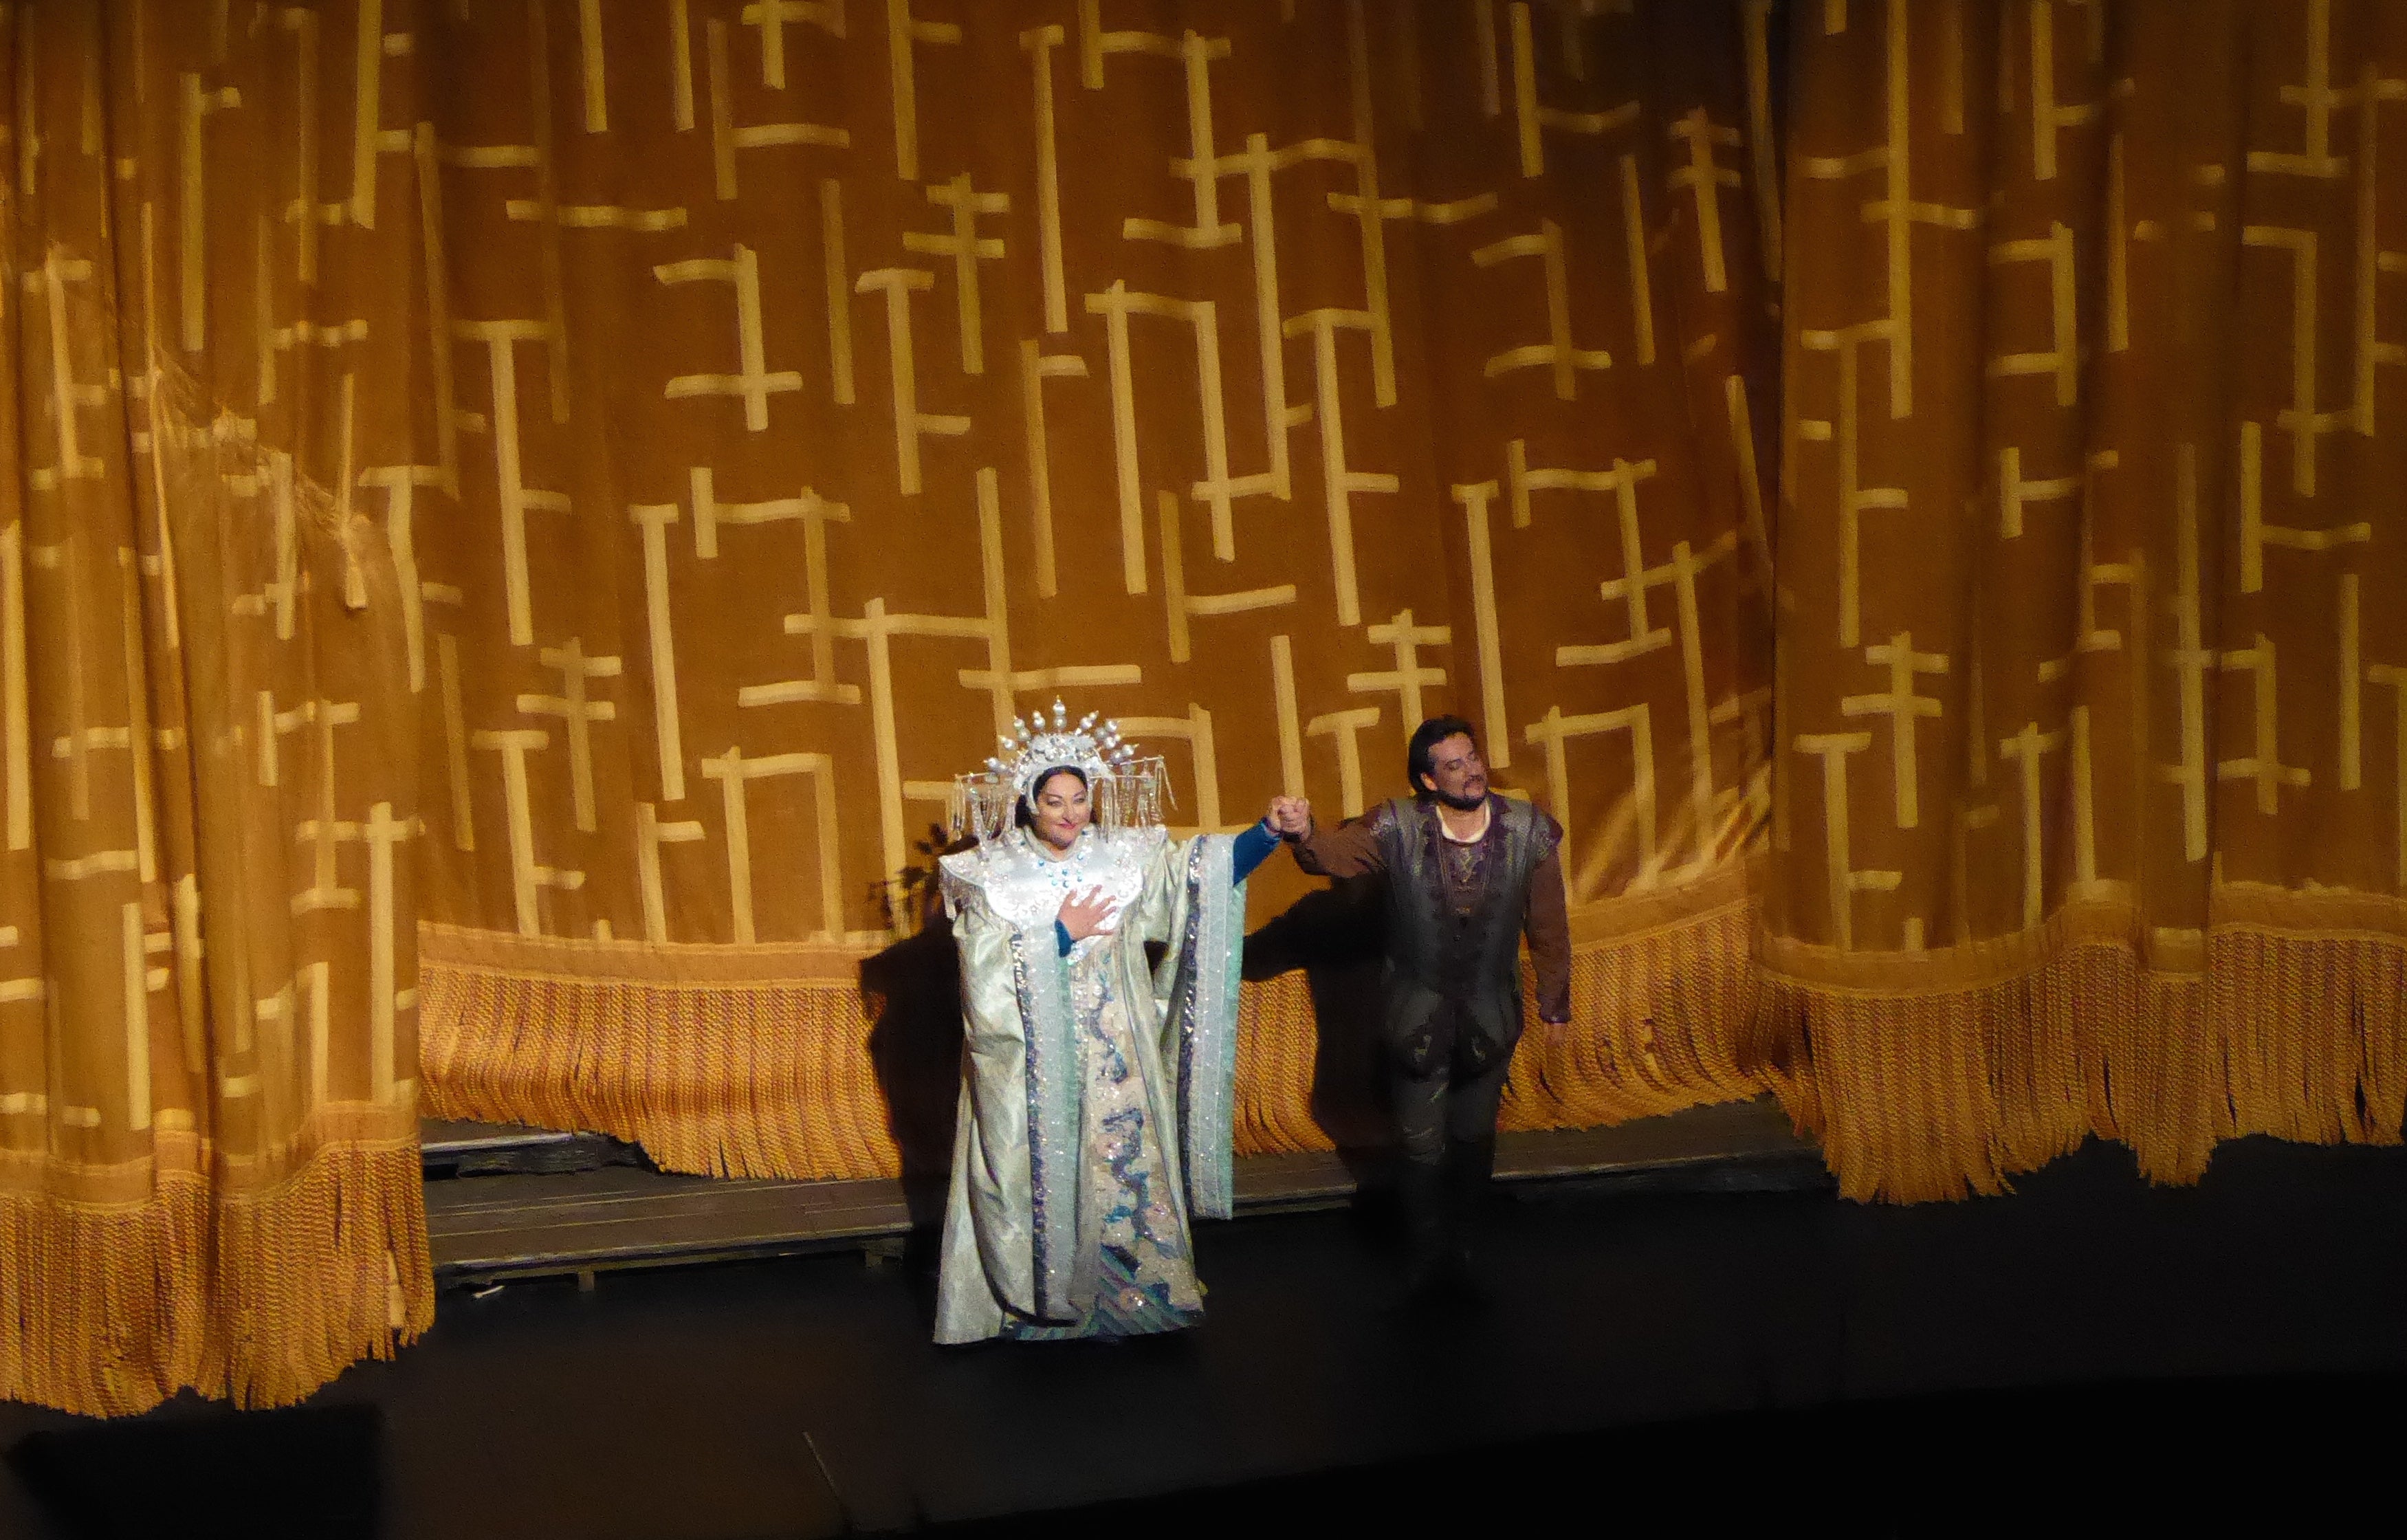 Opera greats, taking a box in front of the golden silk curtain